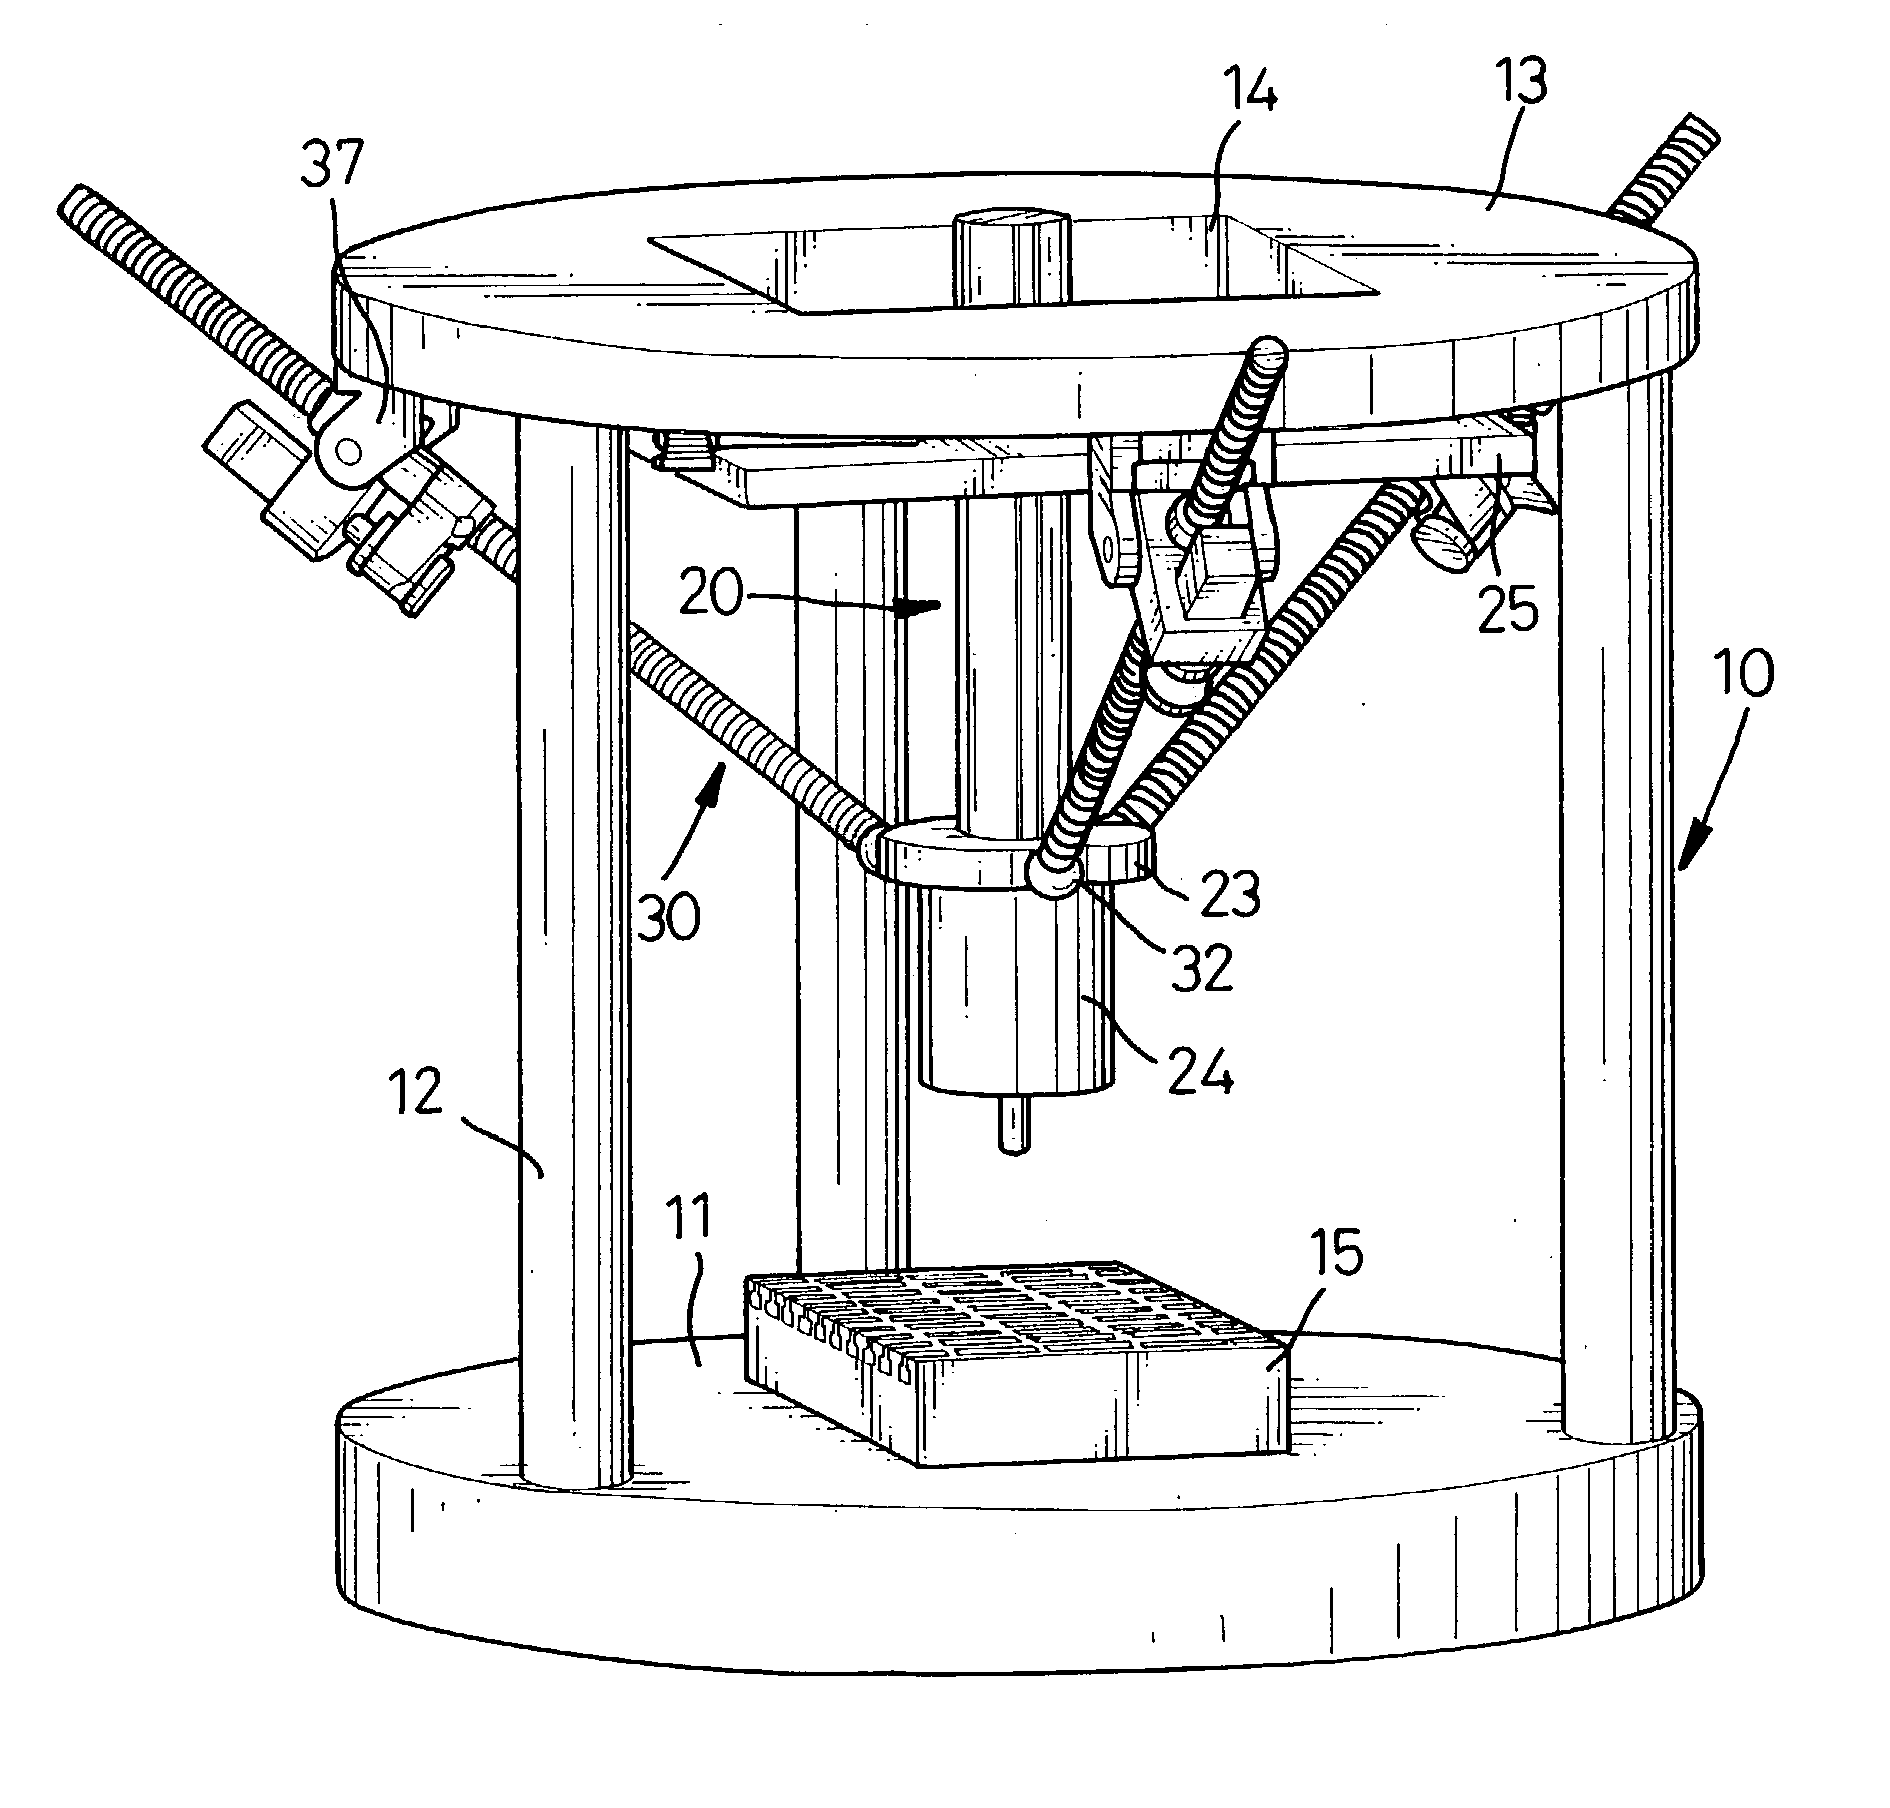 Multi-axis cartesian guided parallel kinematic machine